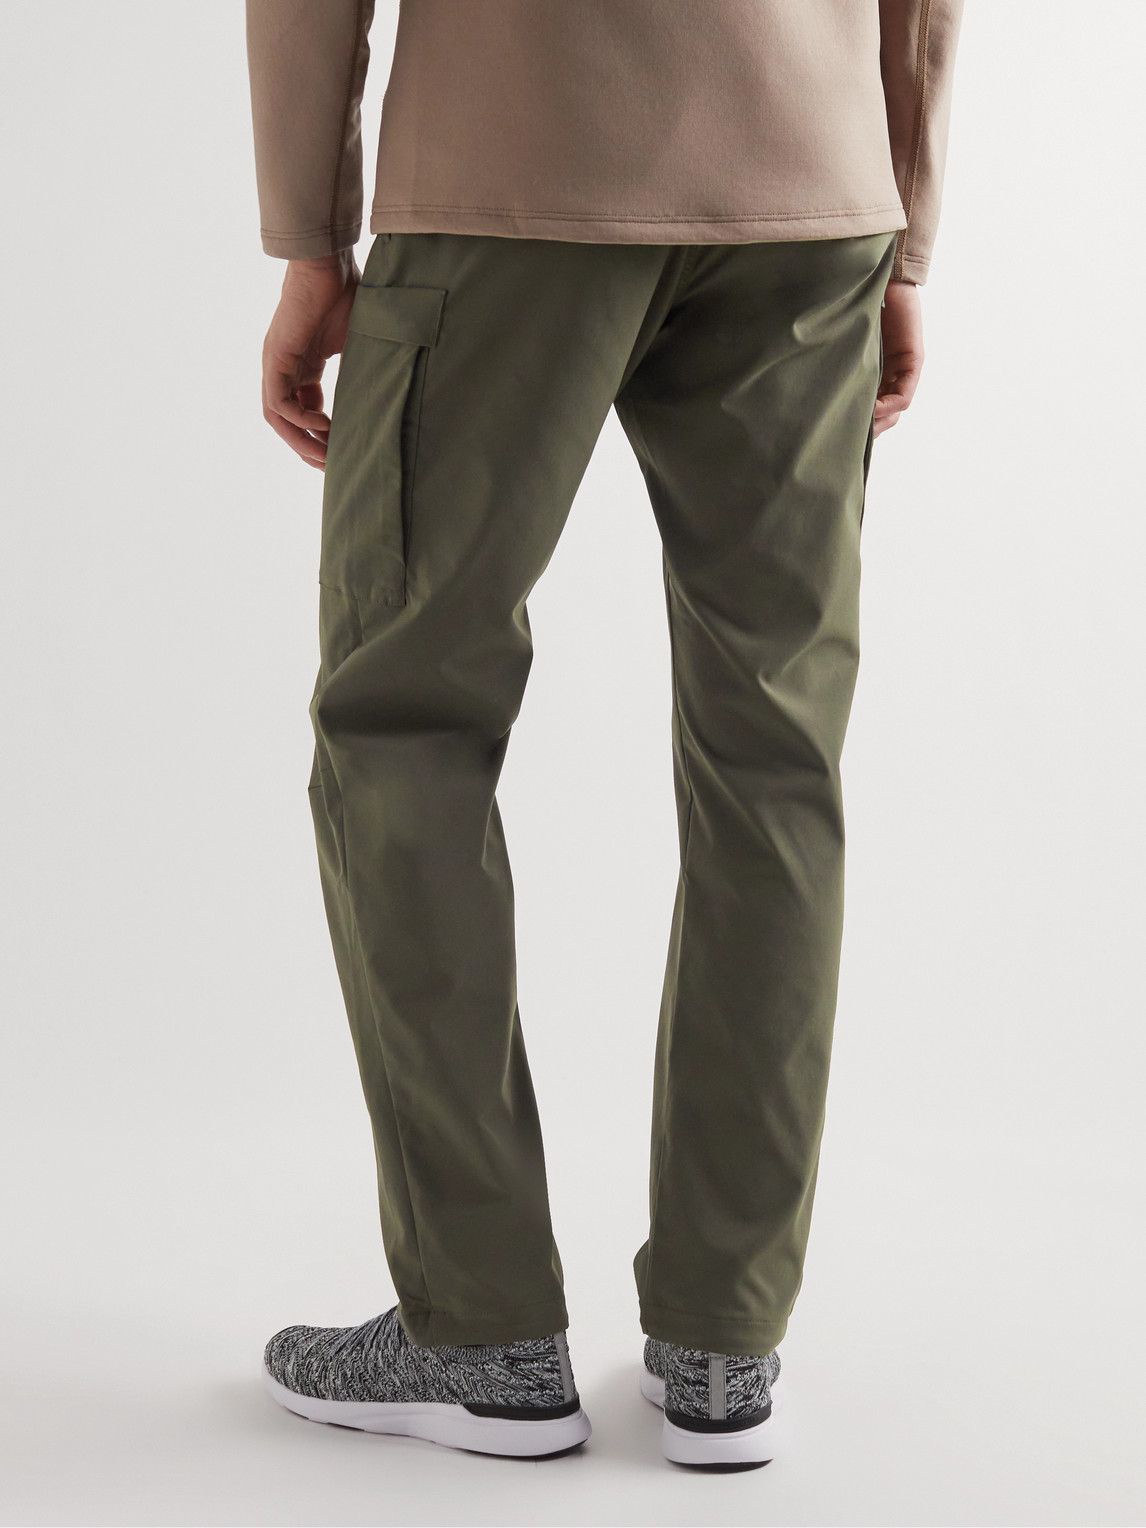 Black Dock Trousers by Houdini on Sale